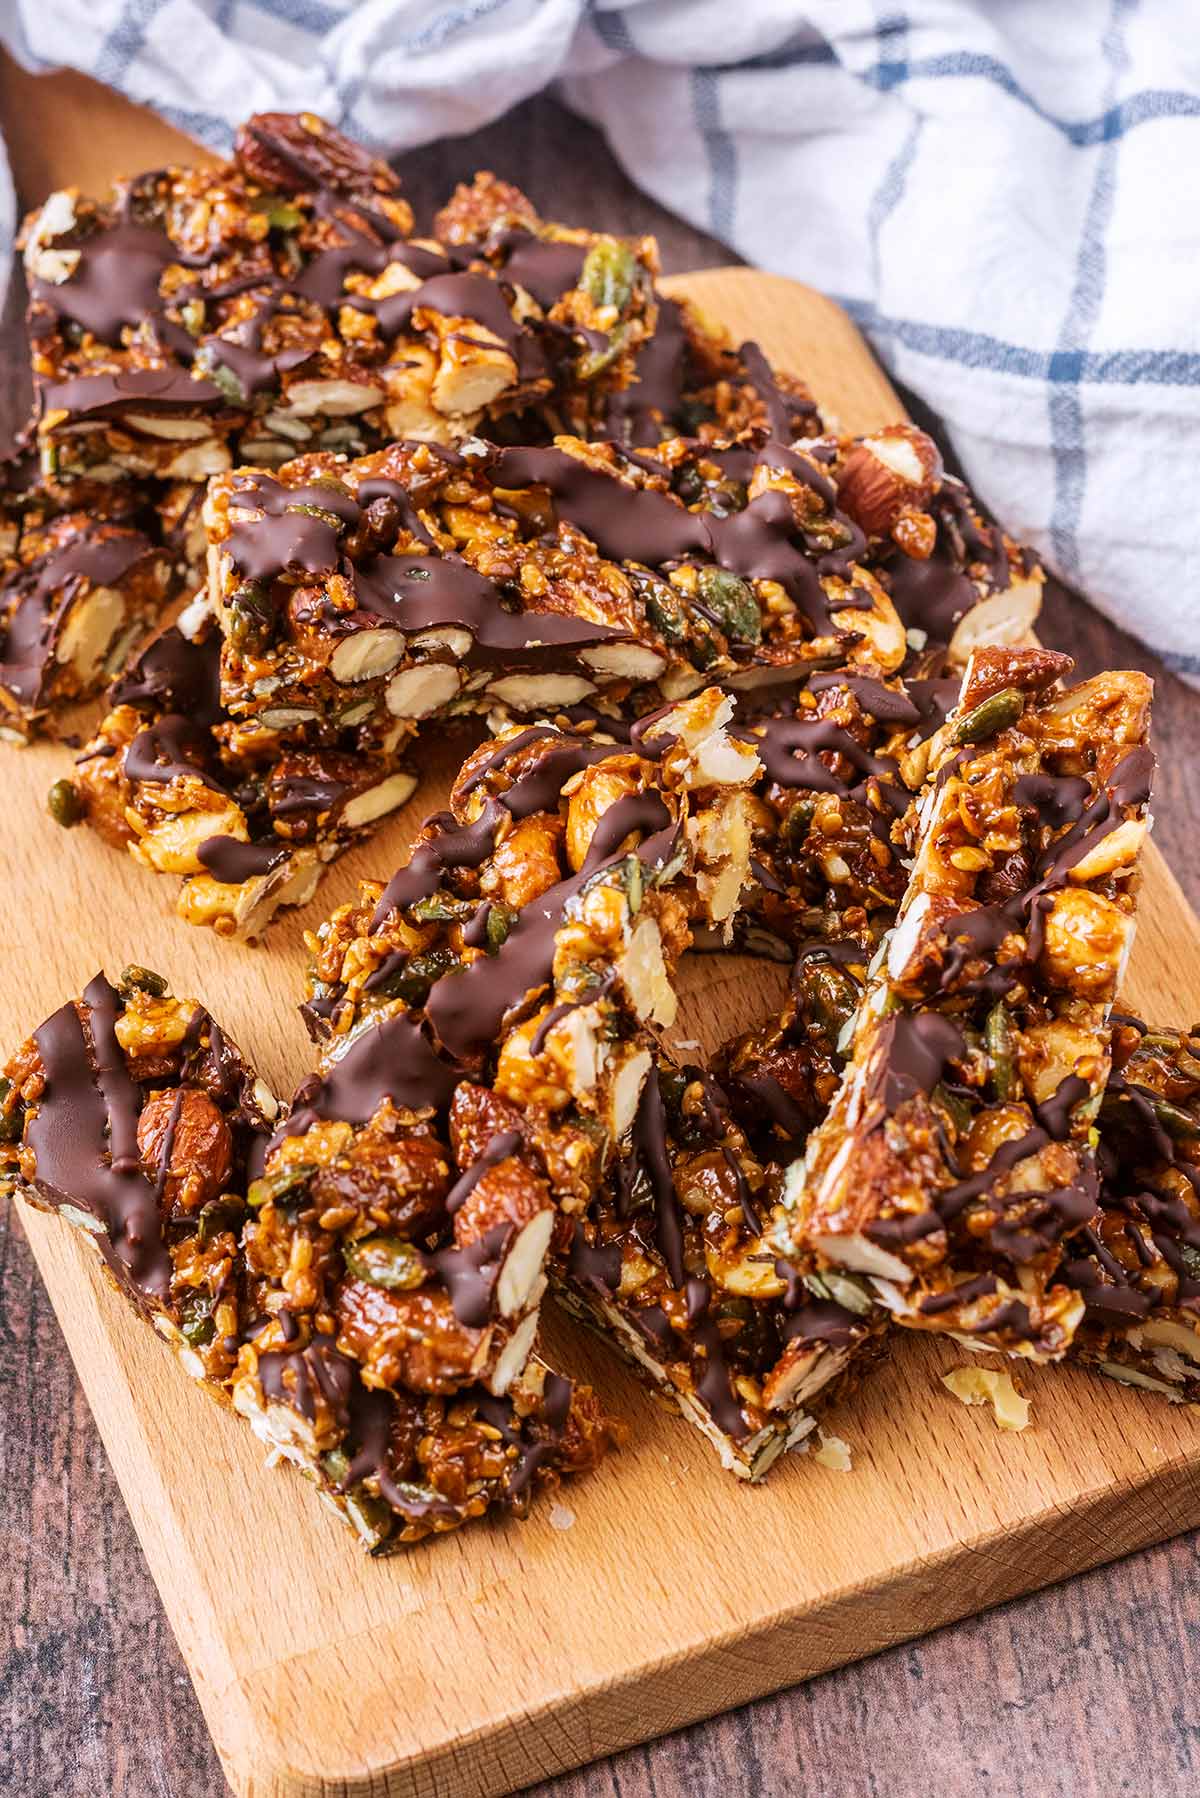 Nut bars piled up on a wooden serving board.